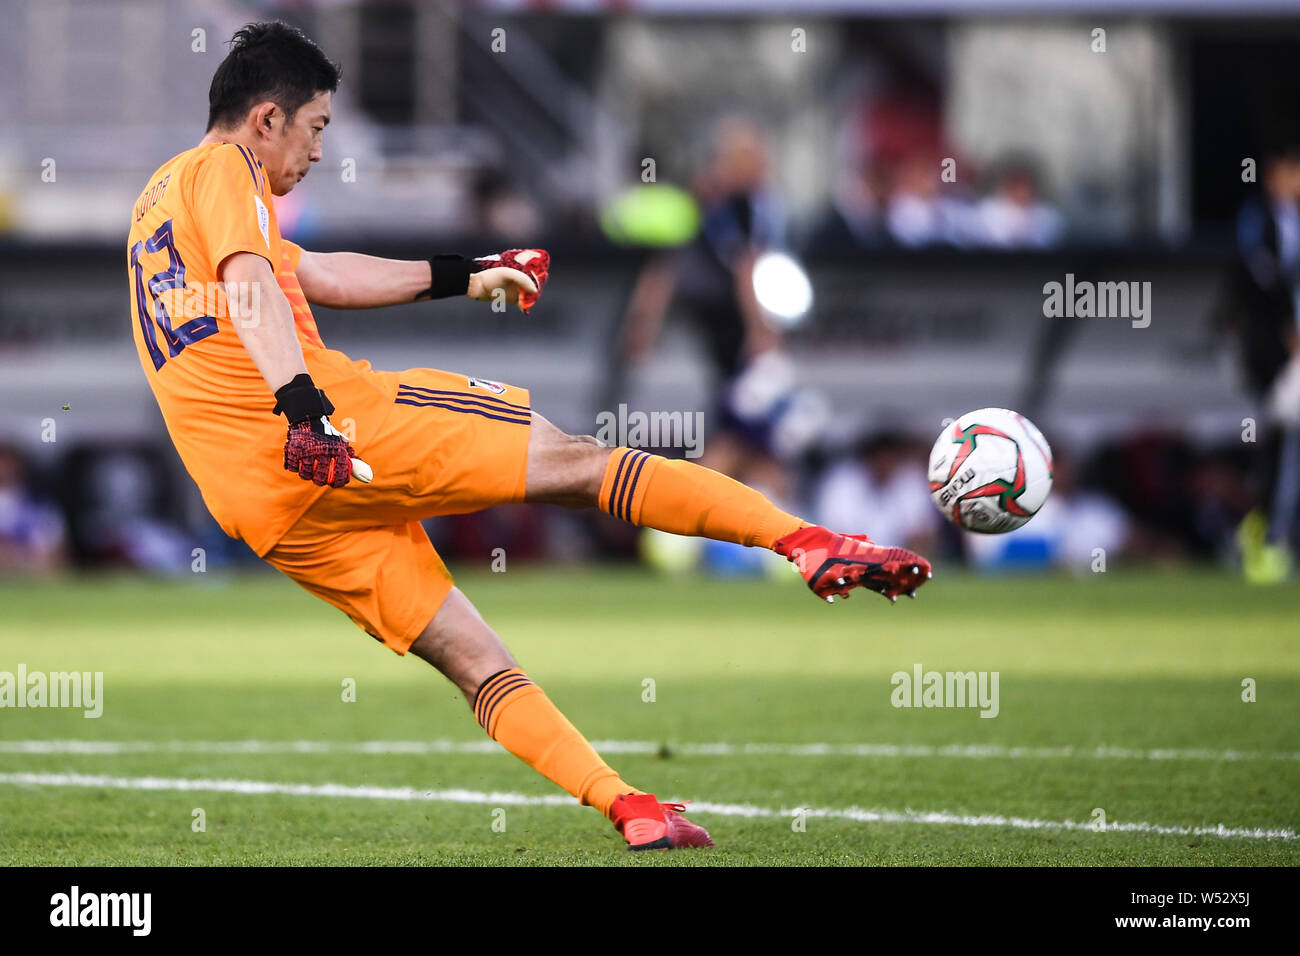 Shuichi Gonda of Japan national football team kicks the ball against Turkmenistan national football team in their AFC Asian Cup group F match in Abu D Stock Photo